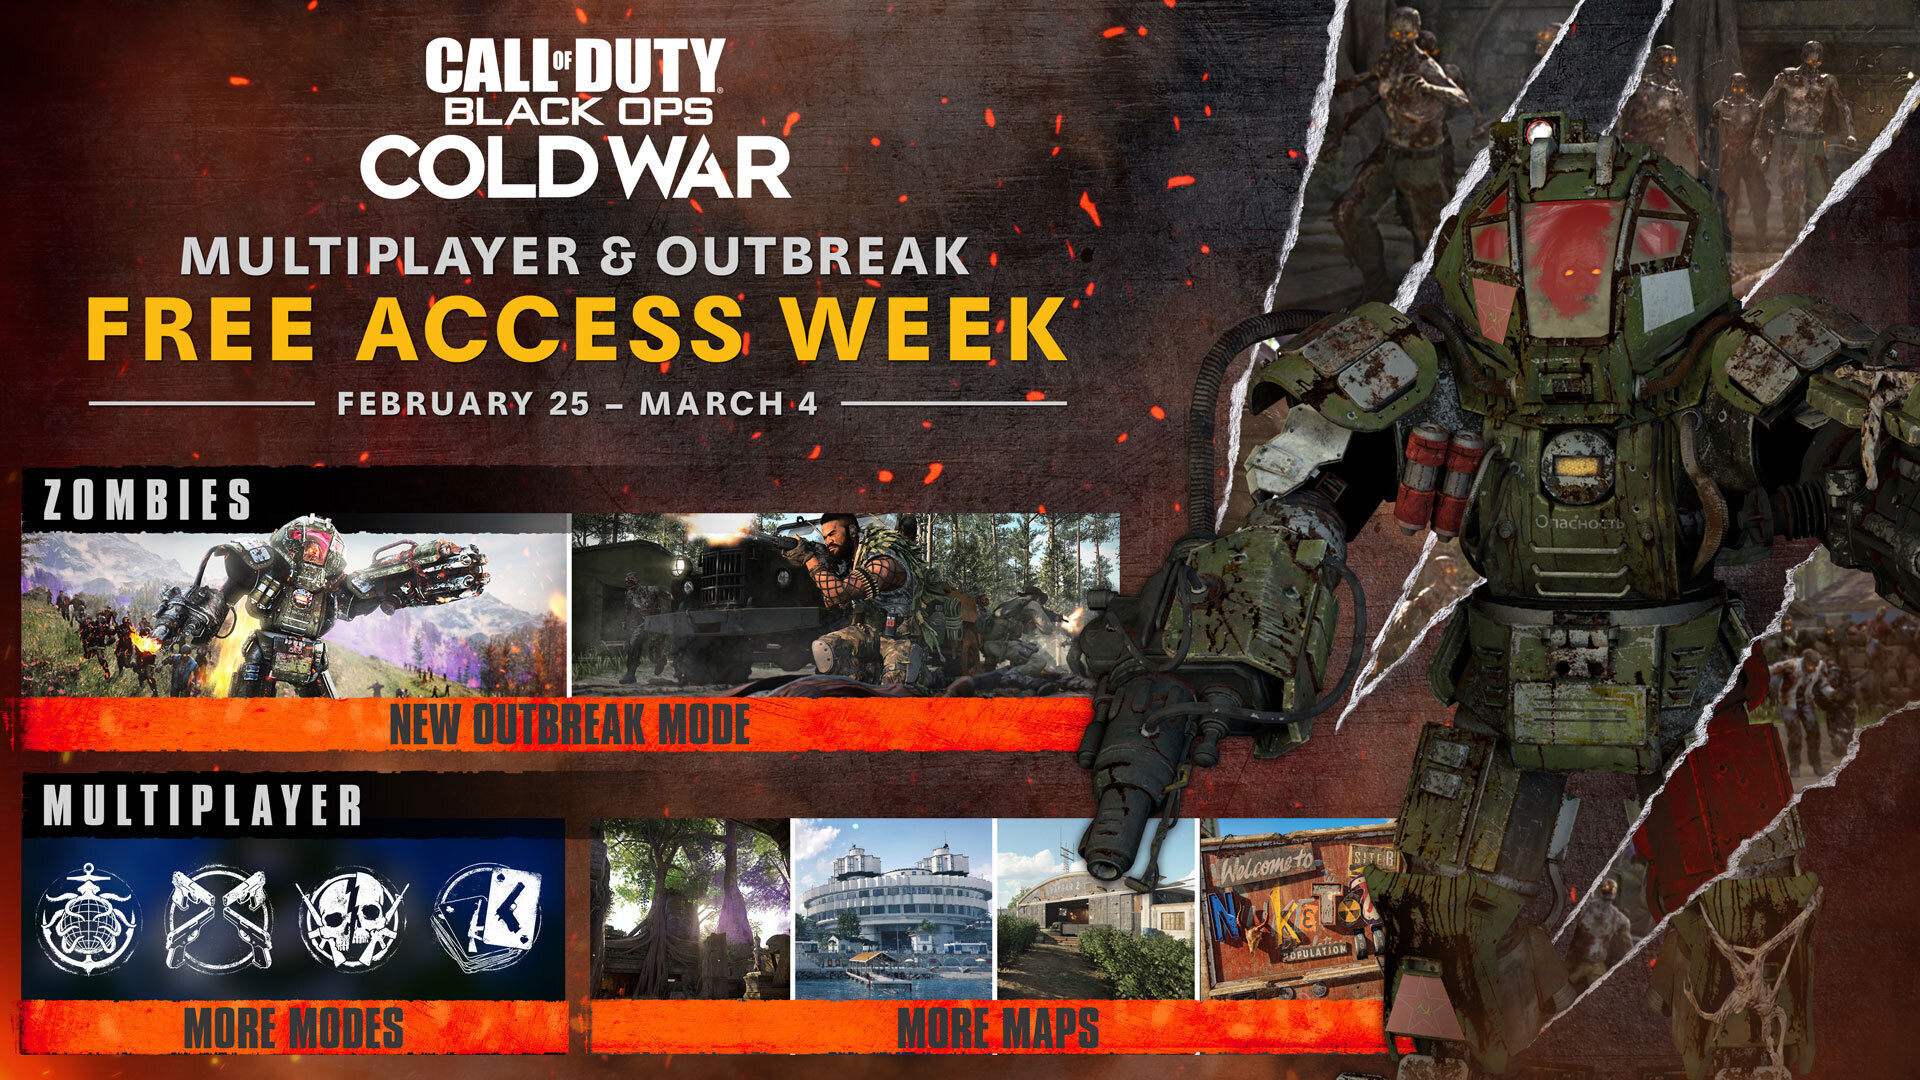 Treyarch Studios On Twitter Less Than 48 Hours Left To Play Multiplayer And Outbreak For Free During Free Access Week Download Blackopscoldwar Free Access On Your Platform S Store And Play For Free - roblox zombie outbreak twitter codes